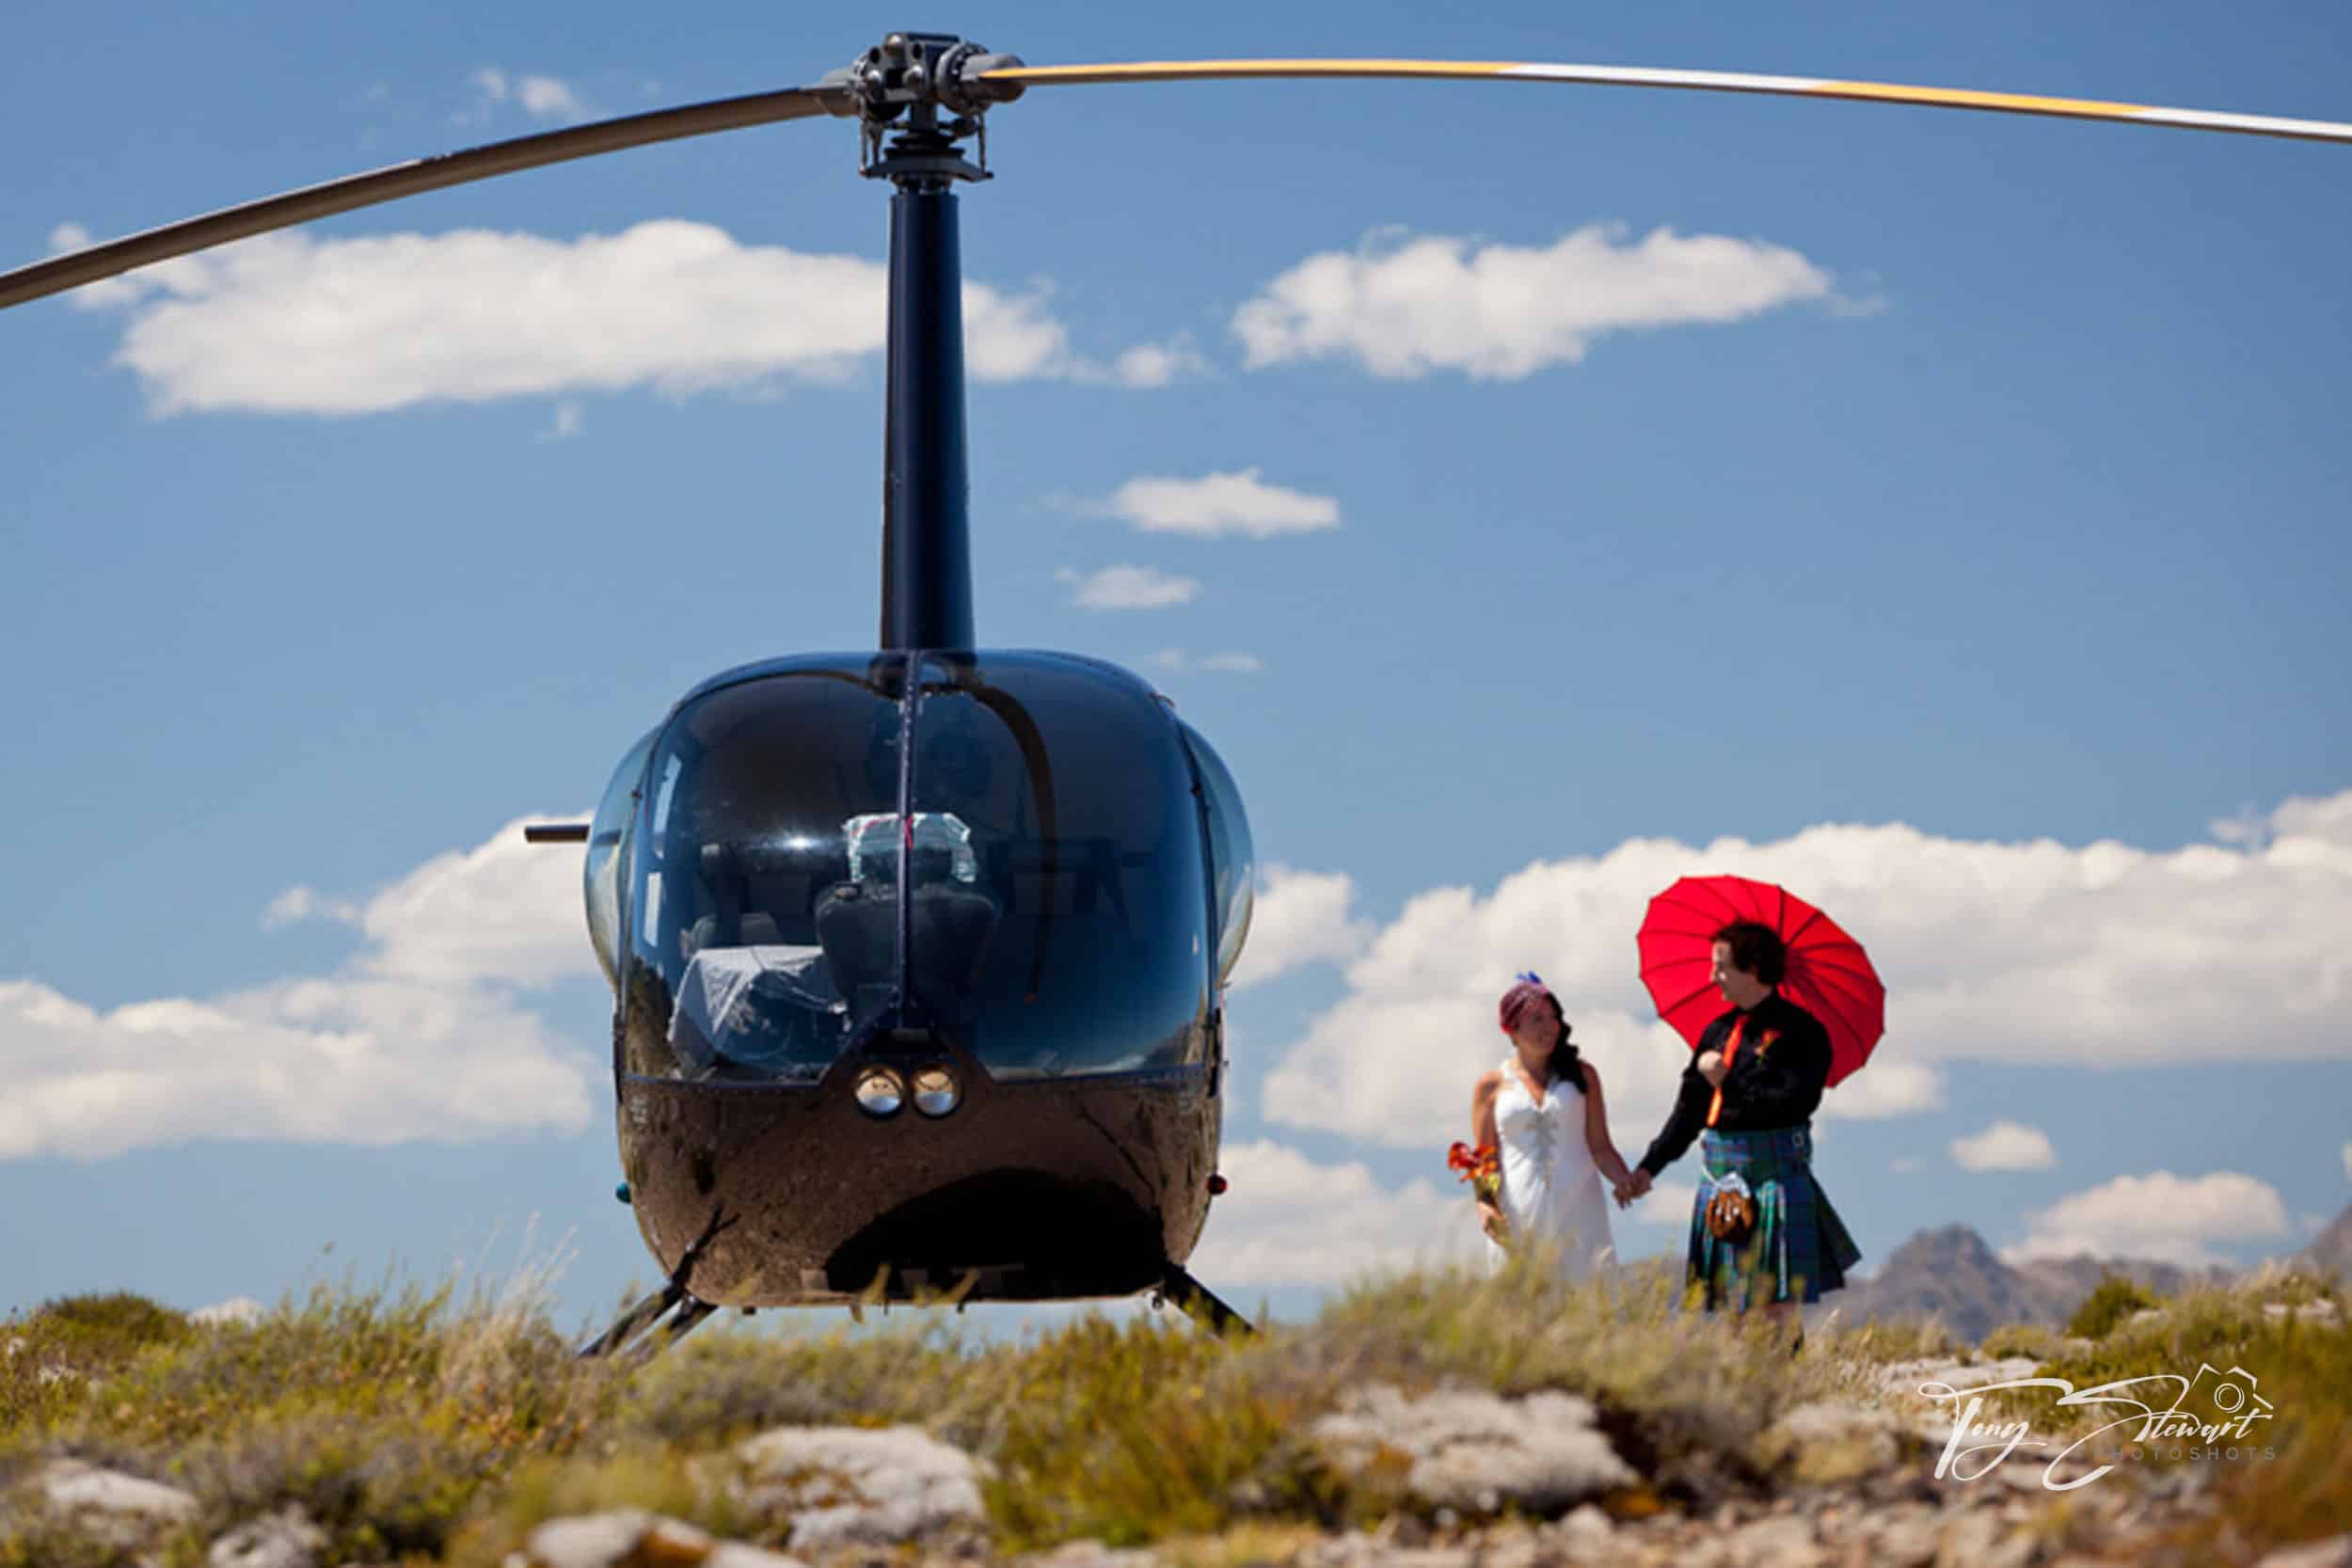 Bride and groom walk on a hilltop towards their helicopter while holding bright red parasol.